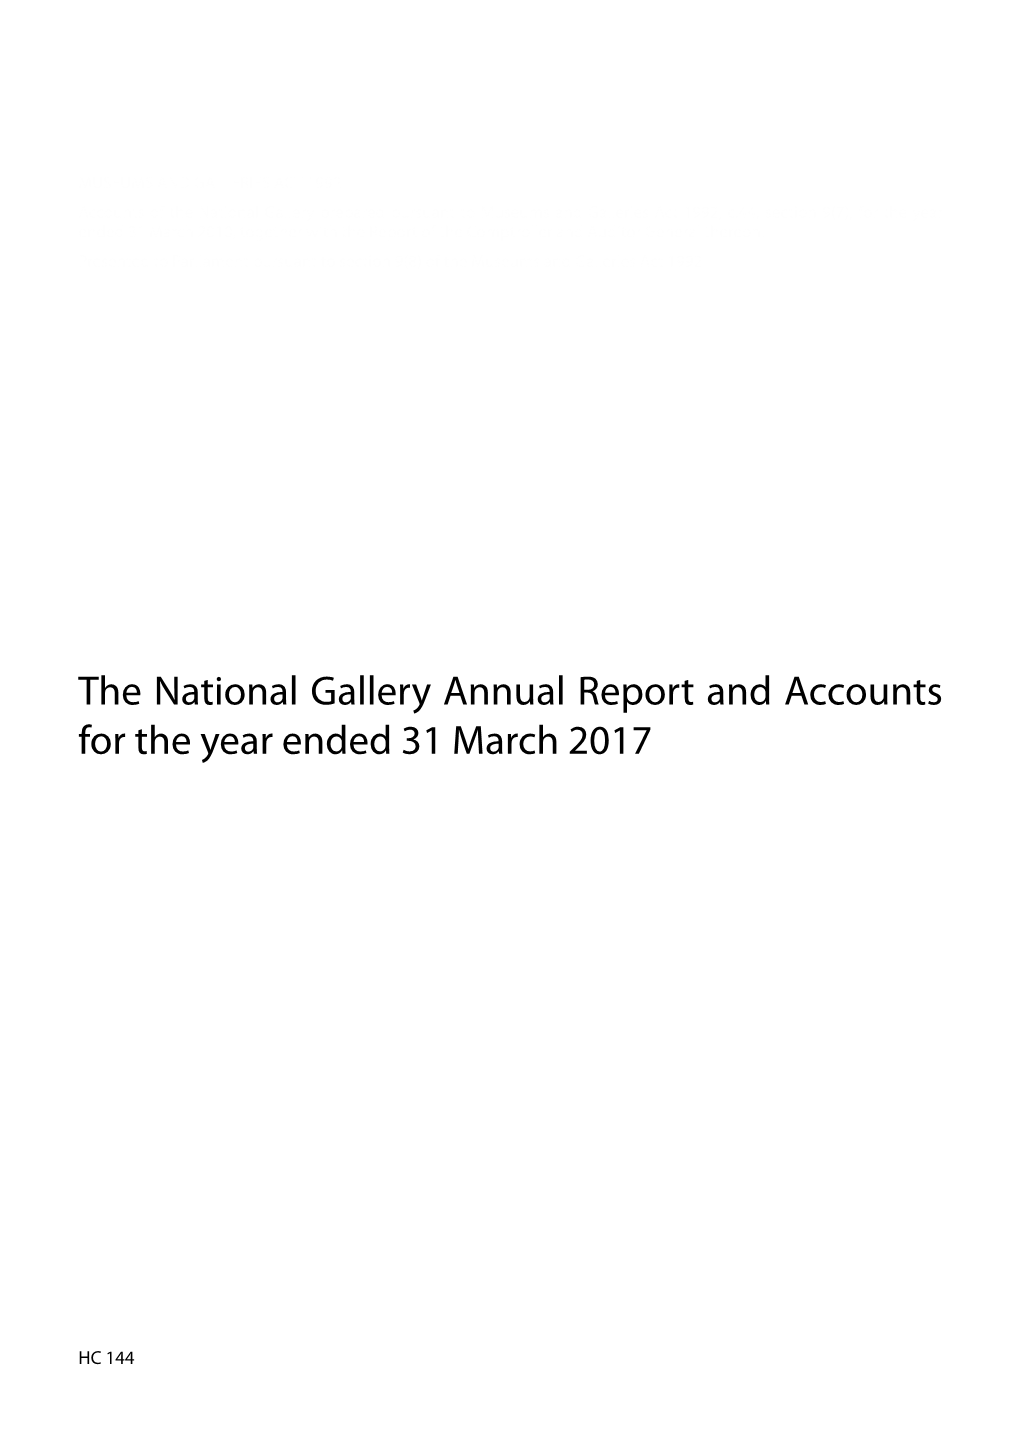 59954 the National Gallery Annual Report and Accounts for the Year